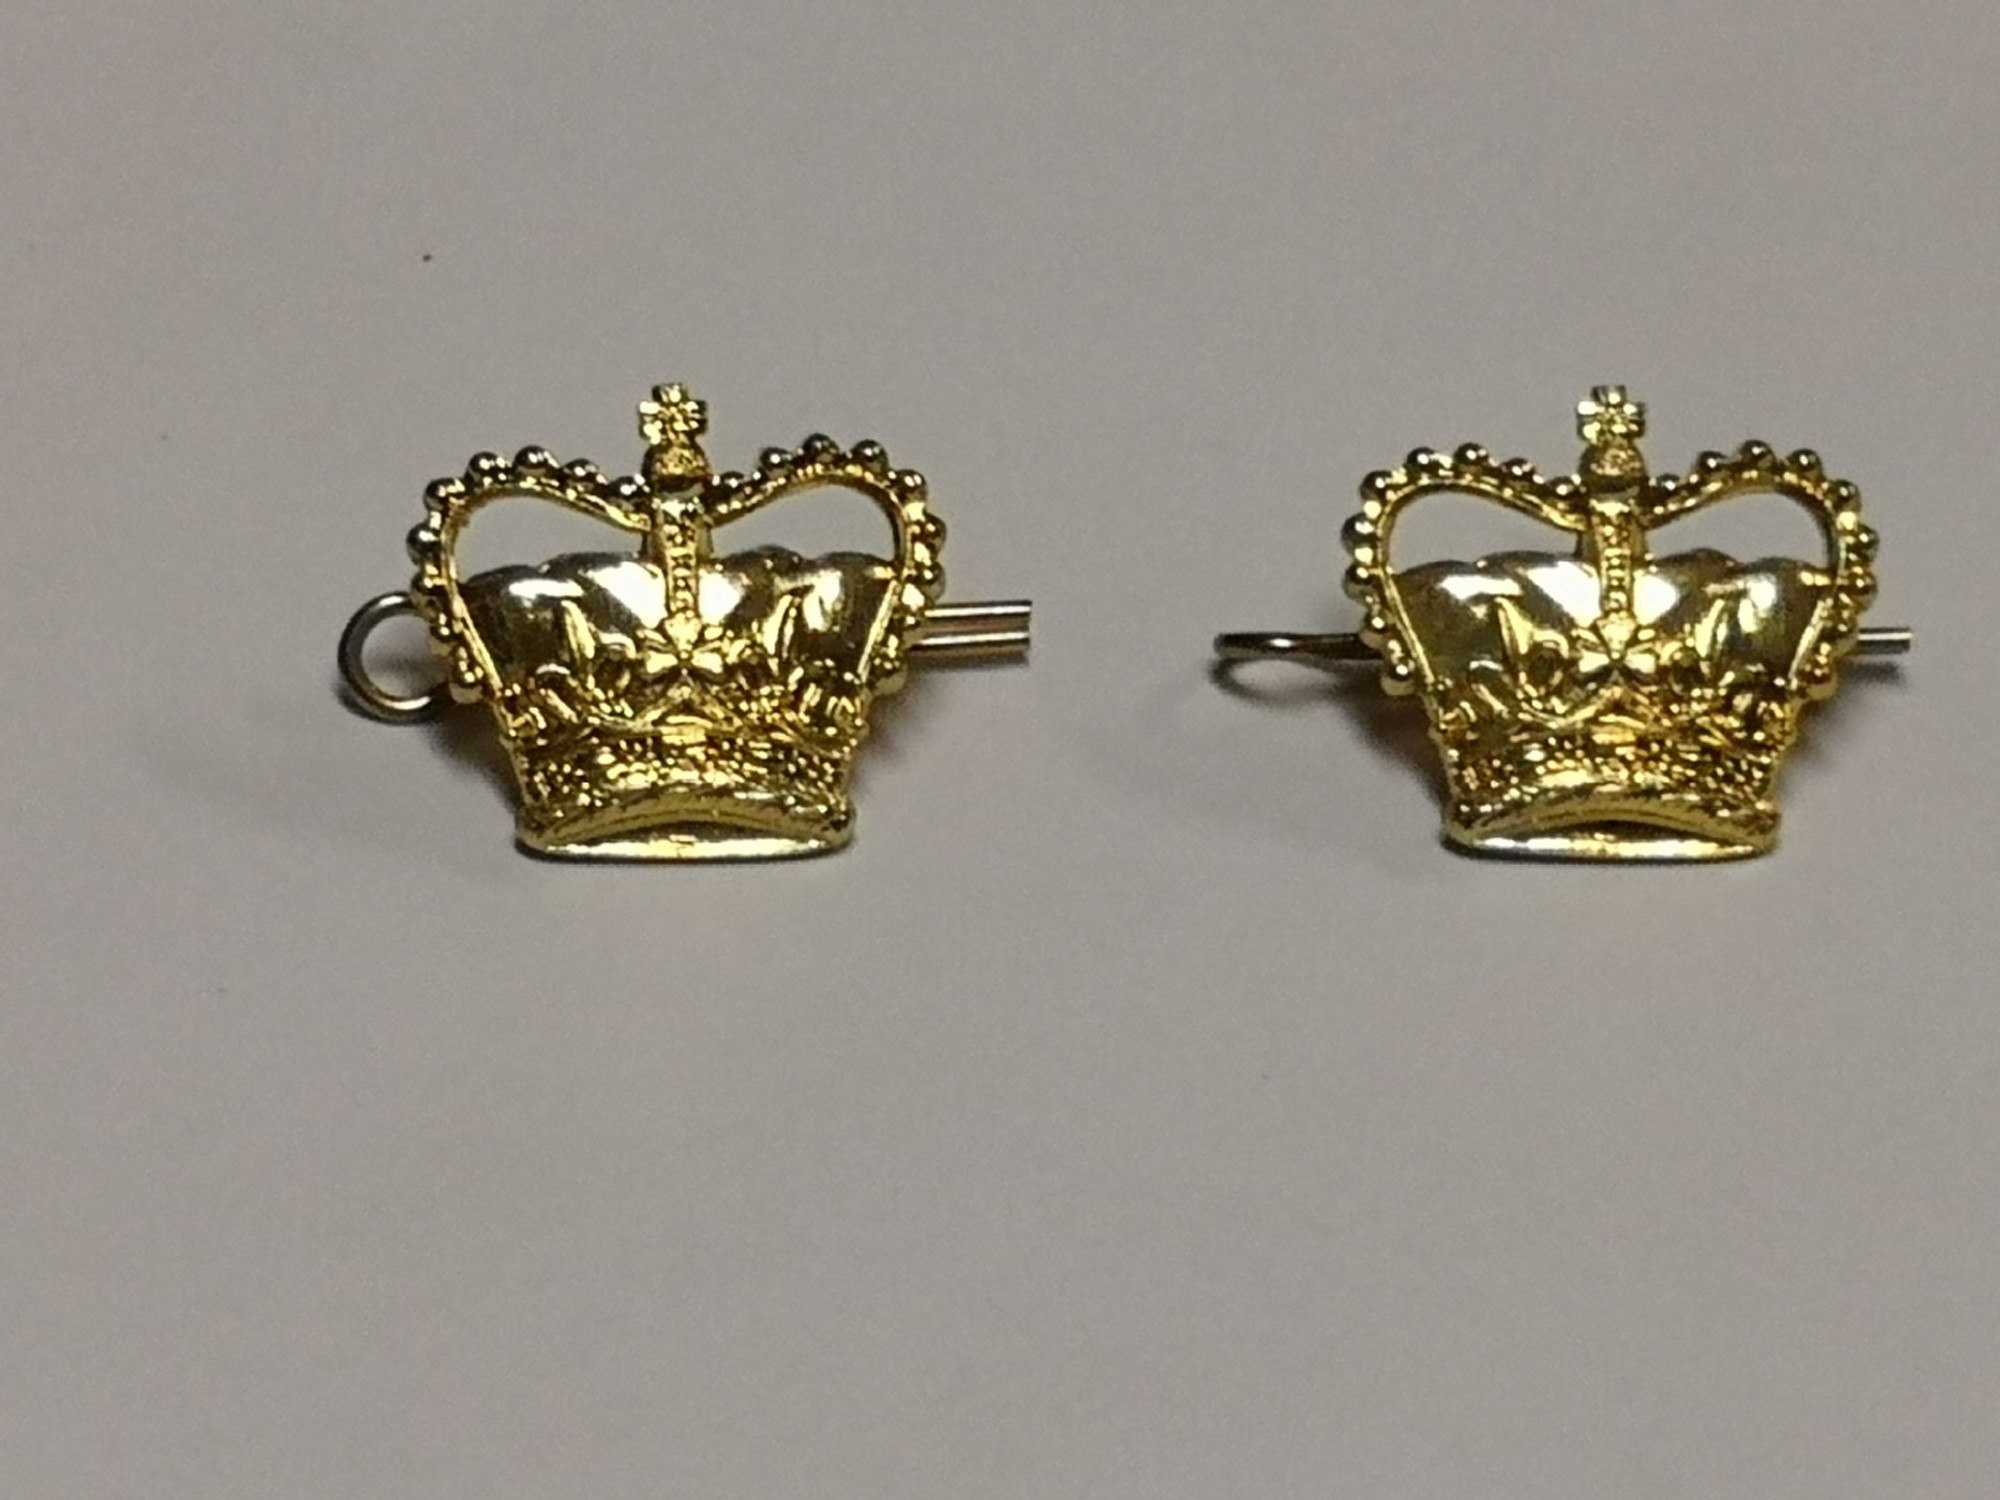 Canadian Armed Forces Crowns - Set of 2